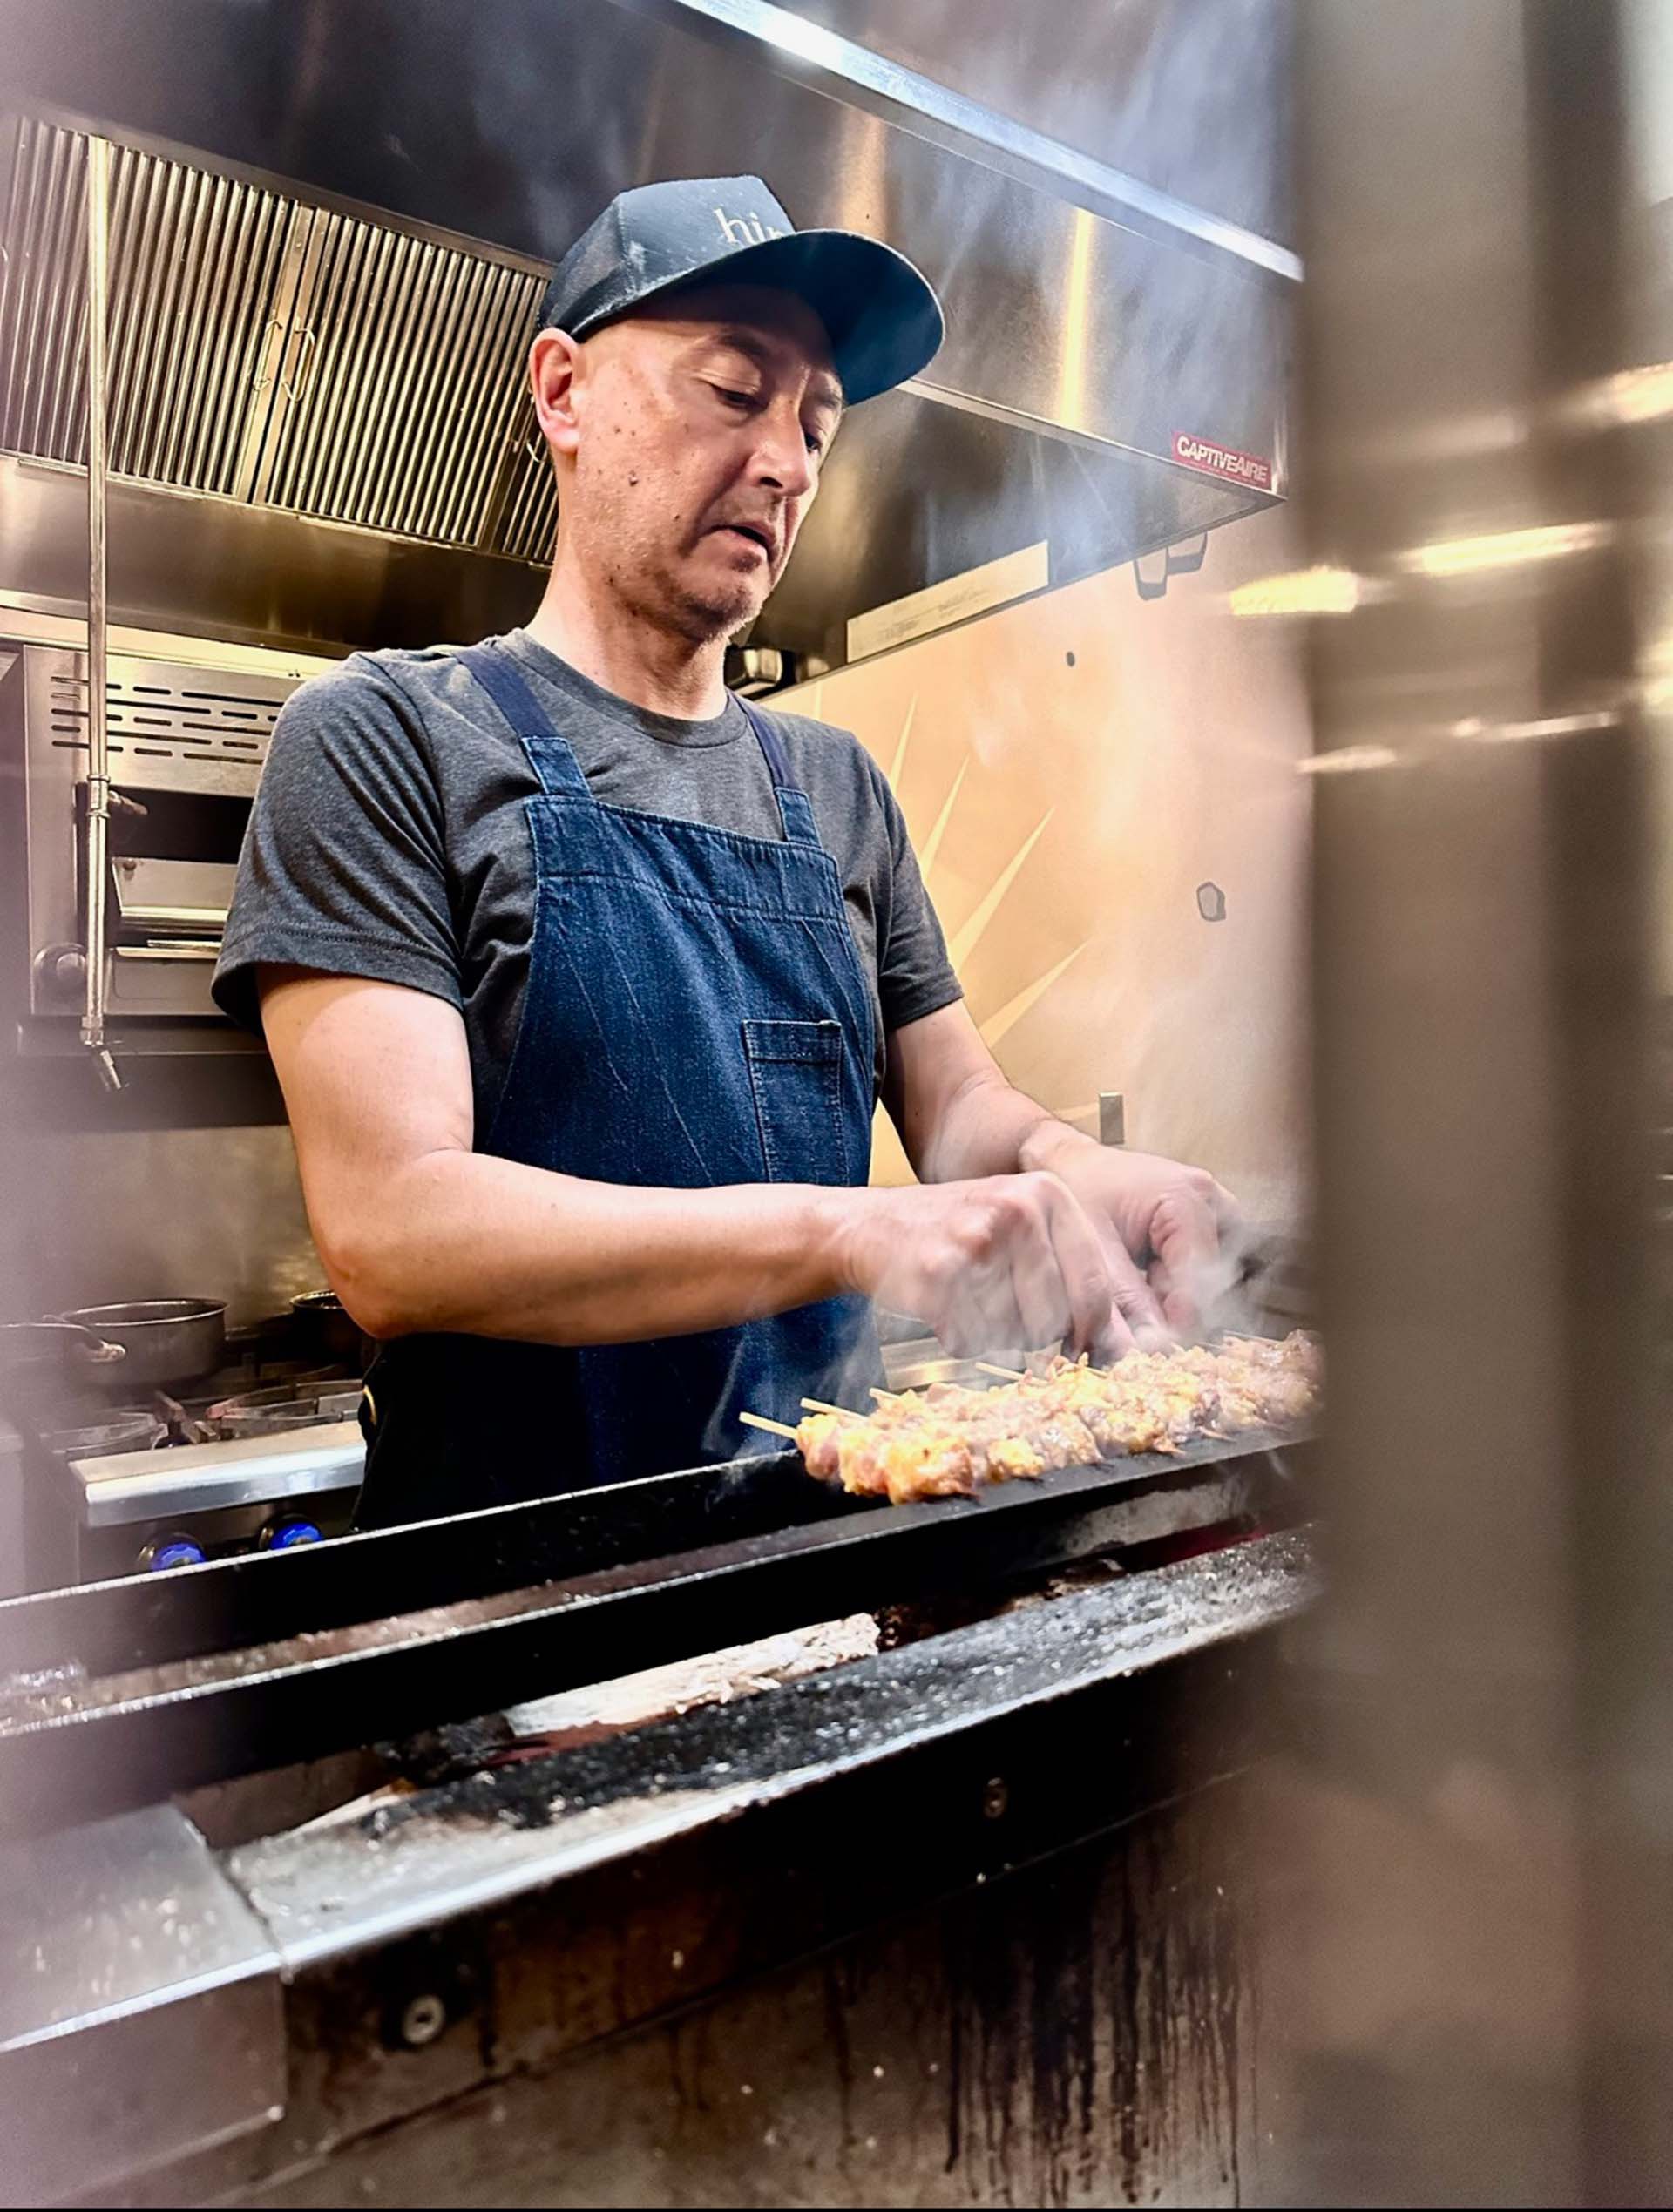 A yakitori chef in a baseball cap and apron turns chicken skewers over a smoky charcoal gril.